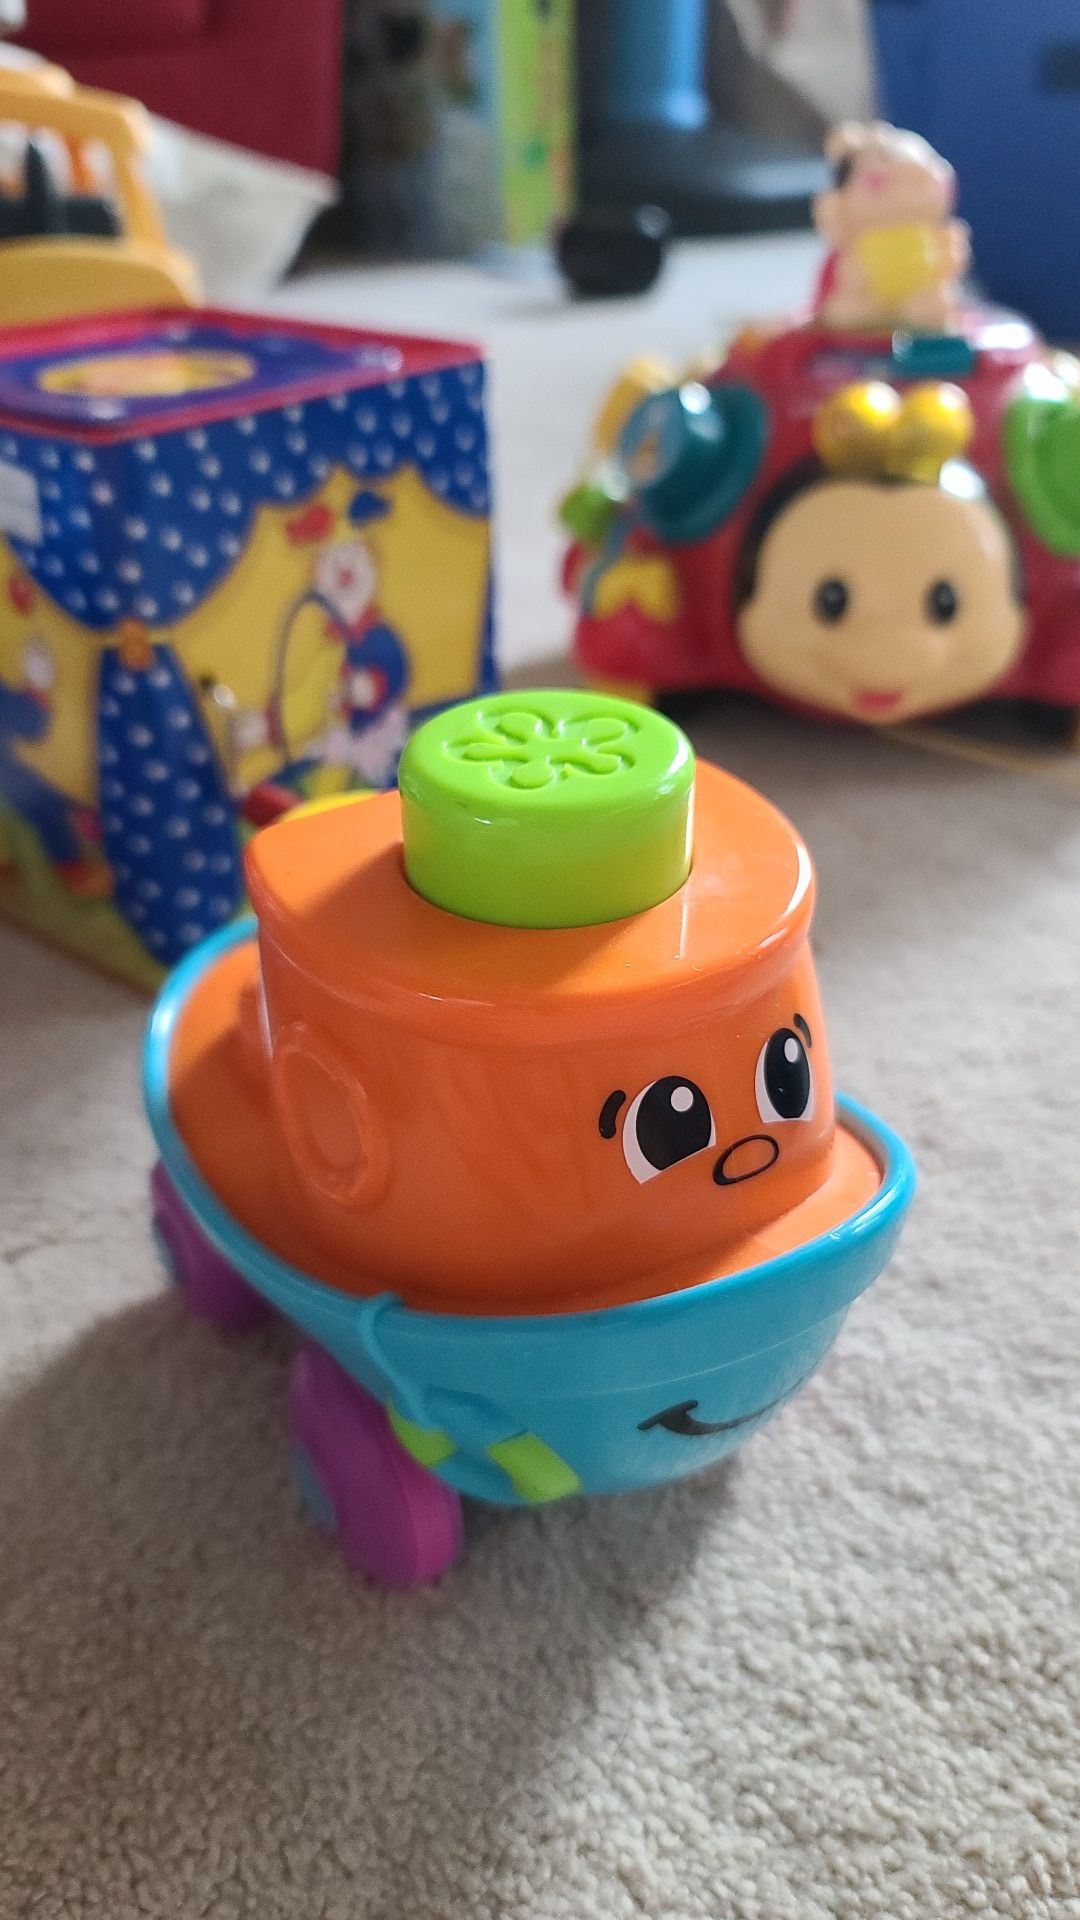 Fisher-price rolling boat (making Squeakee sound)